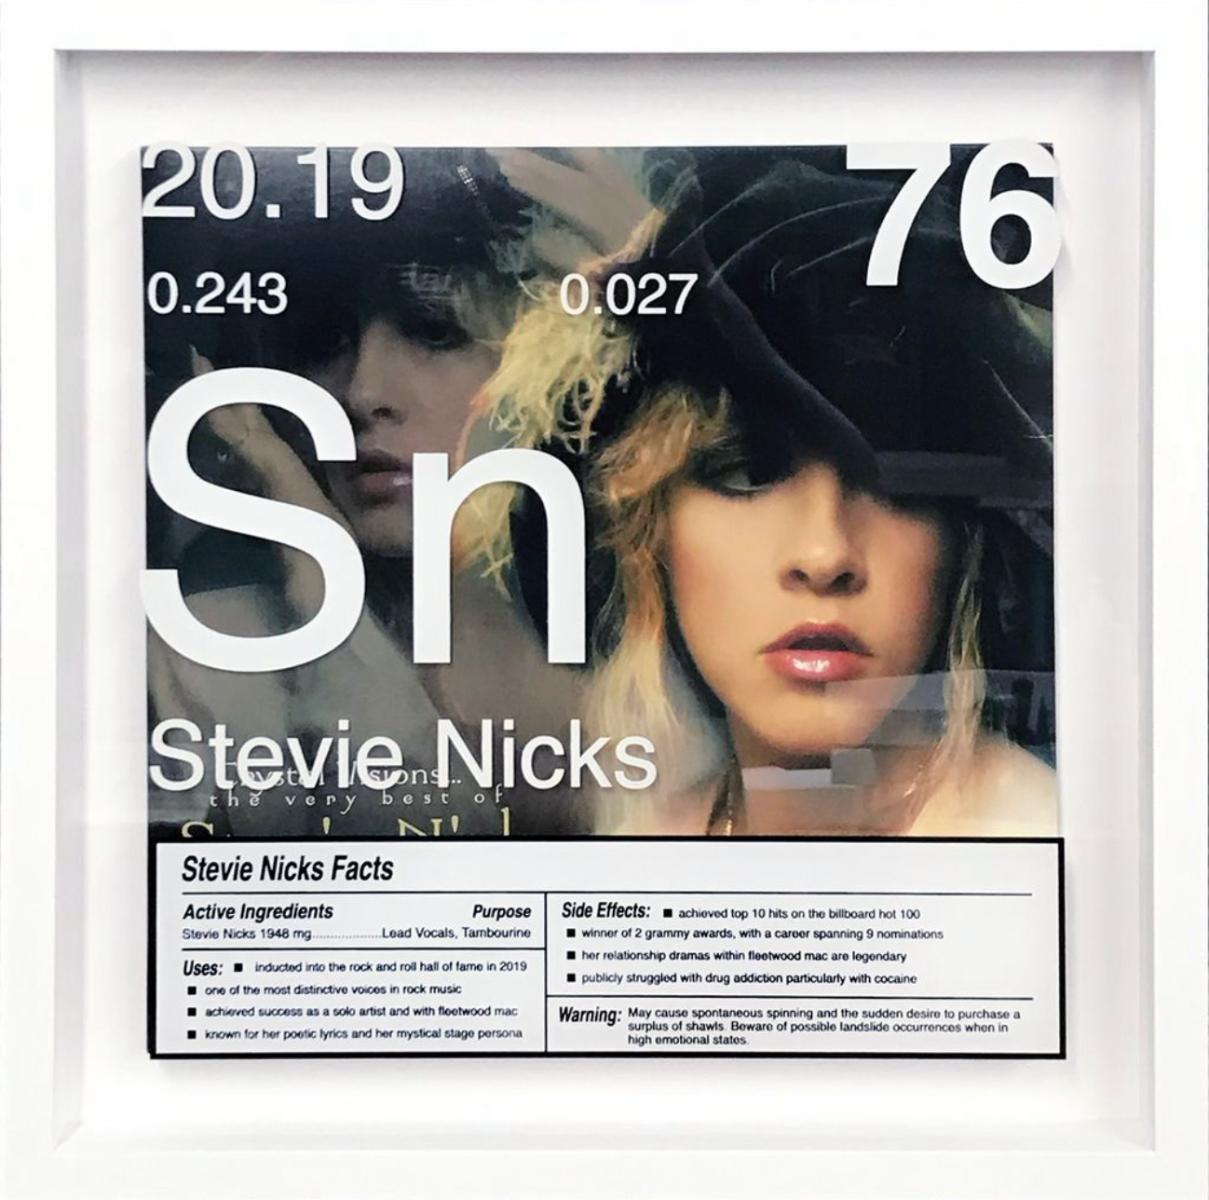 Stevie Nicks _76 Limited edition 1/9

Daniel Allen Cohen, a Los Angeles-based artist renowned for his multidisciplinary approach, transforms popular culture into conceptual art. His creations are nuanced reflections of societal values, desires,